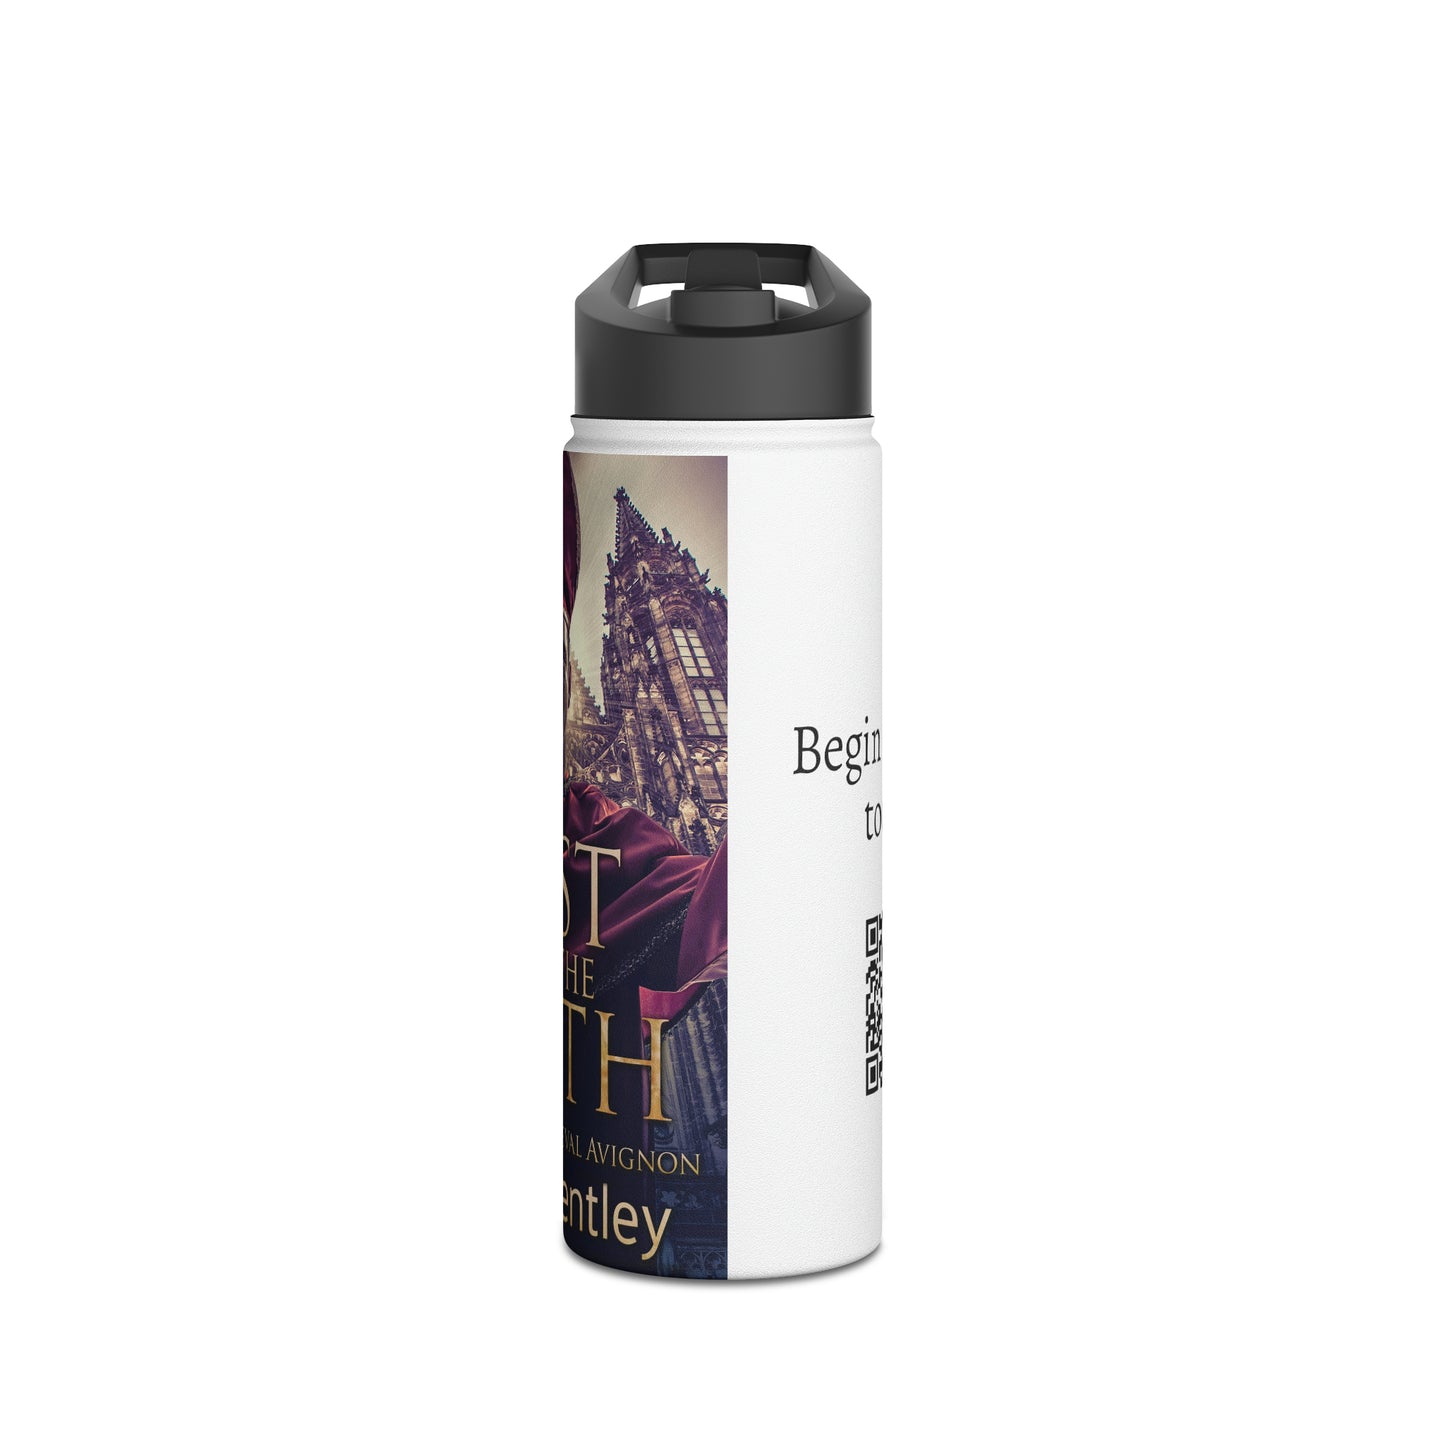 Fist Of The Faith - Stainless Steel Water Bottle